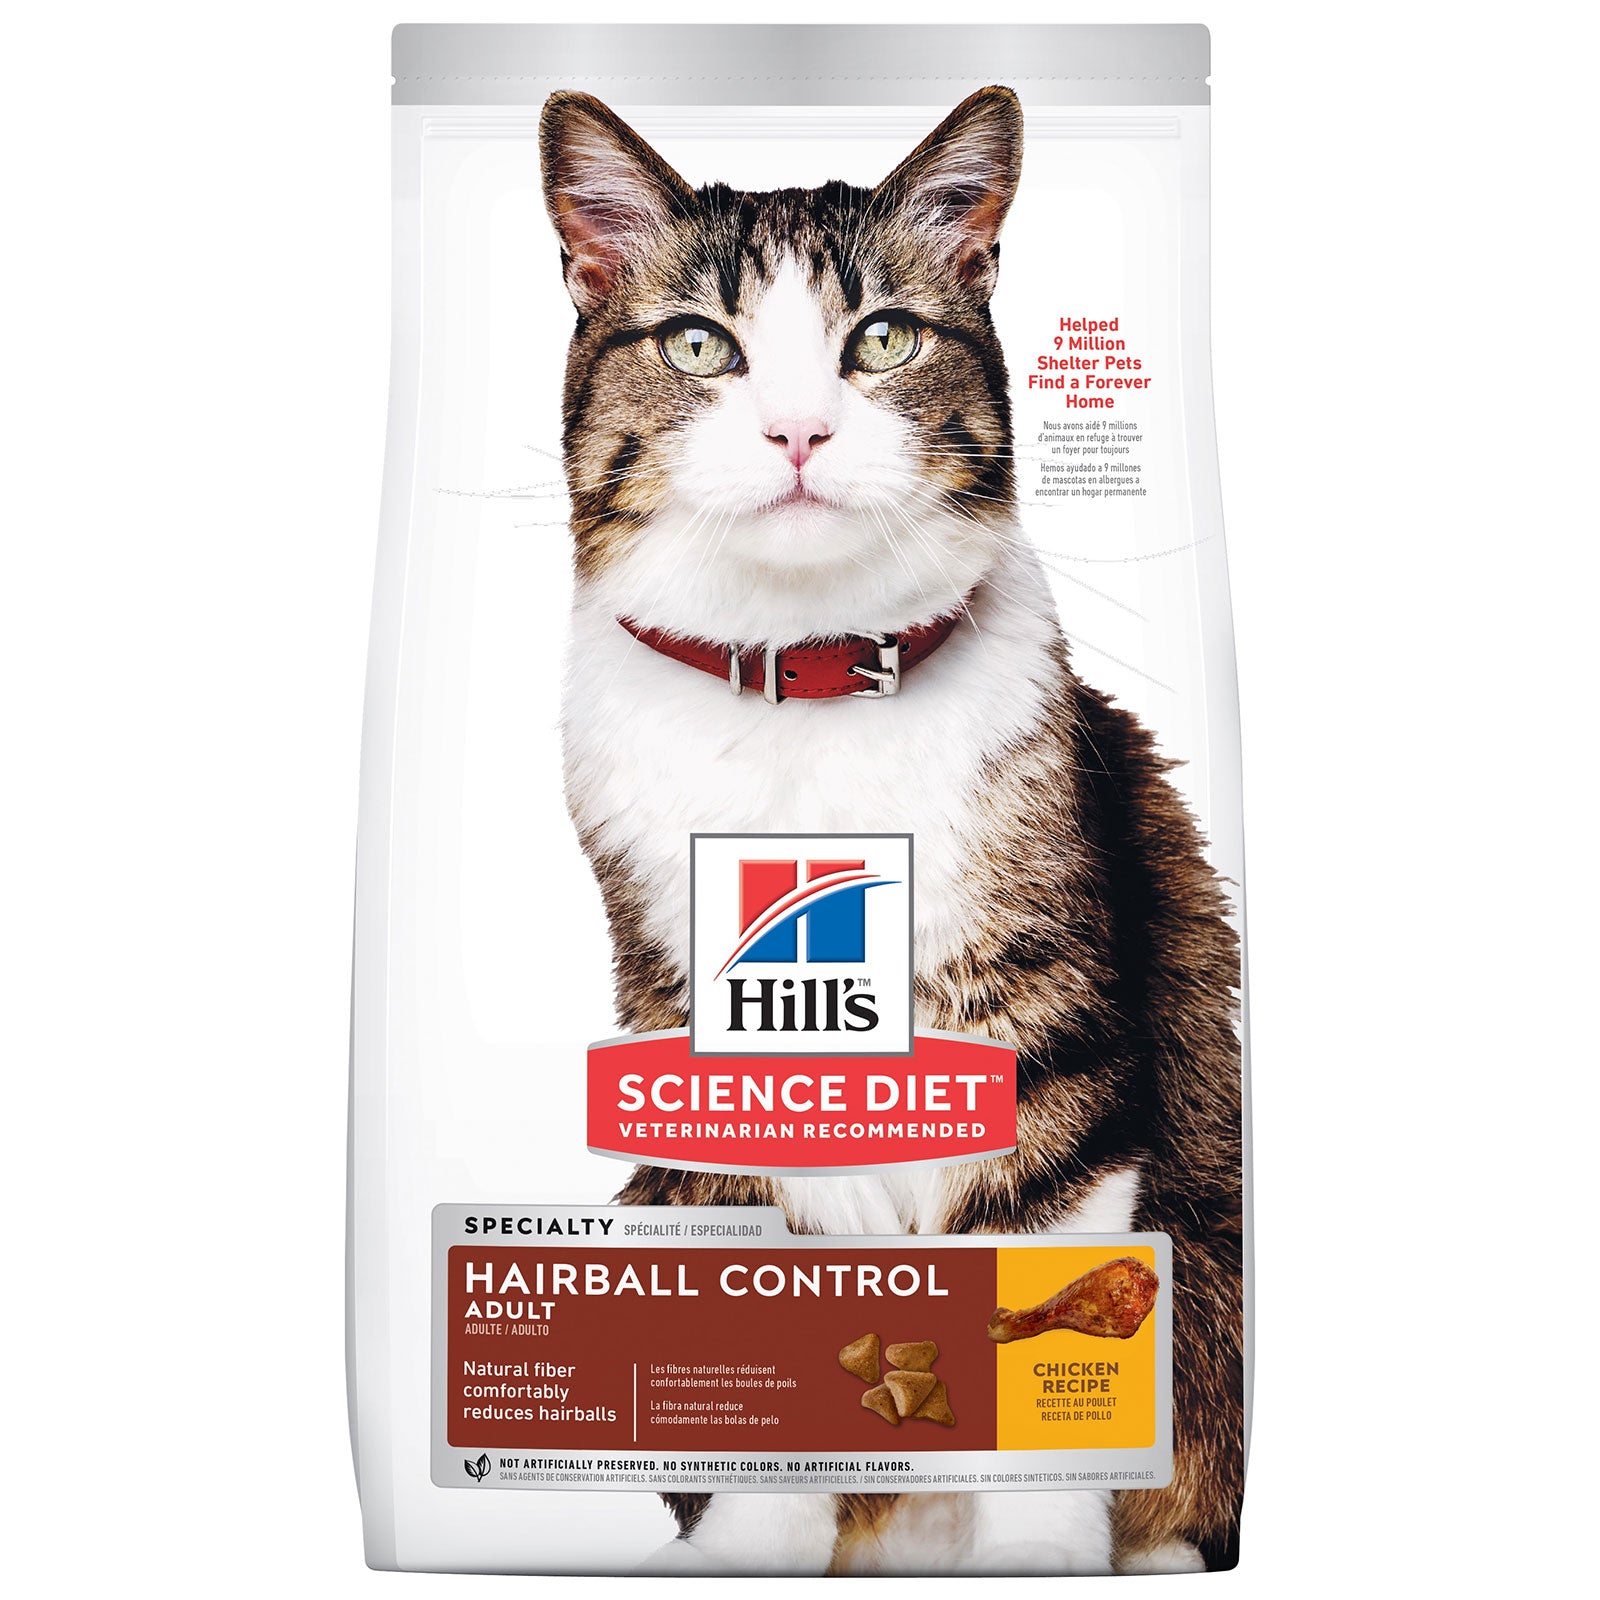 Hill's Science Diet Cat Food Adult Hairball Control